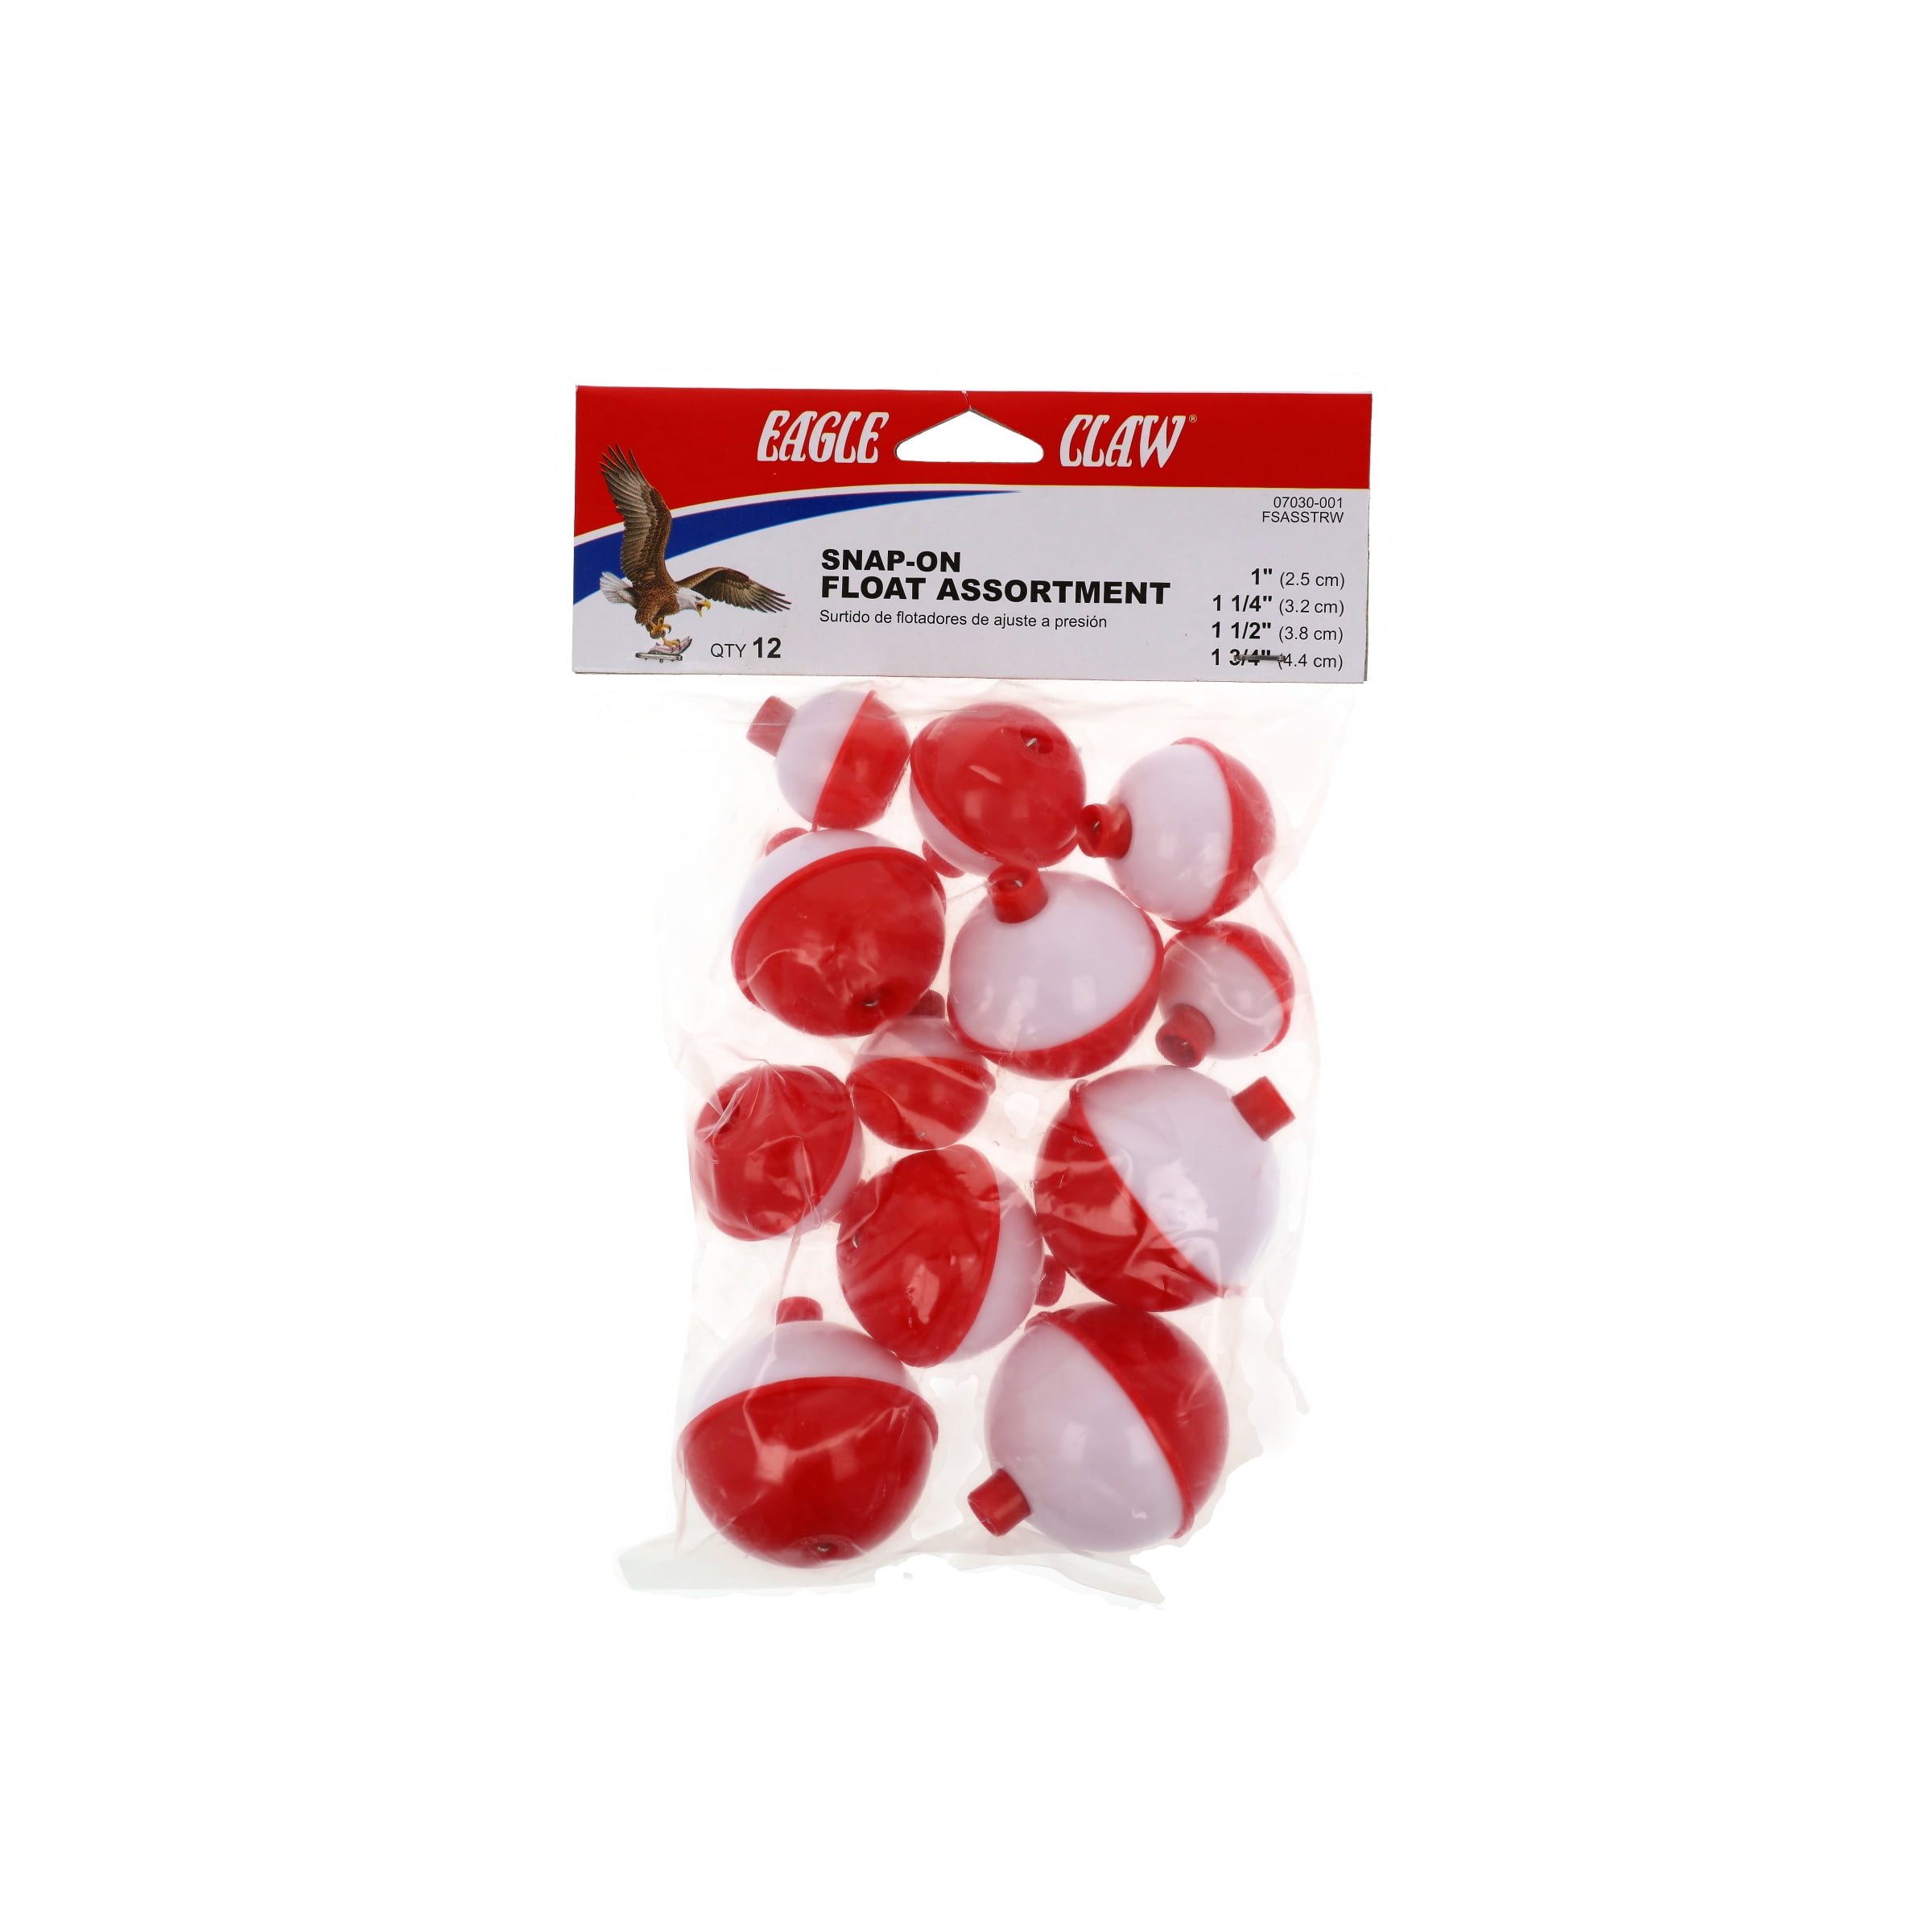 10 SMALL 1 INCH ROUND SNAP ON FOAM FISHING FLOATS BOBBERS PANFISH TROUT  CHOOSE